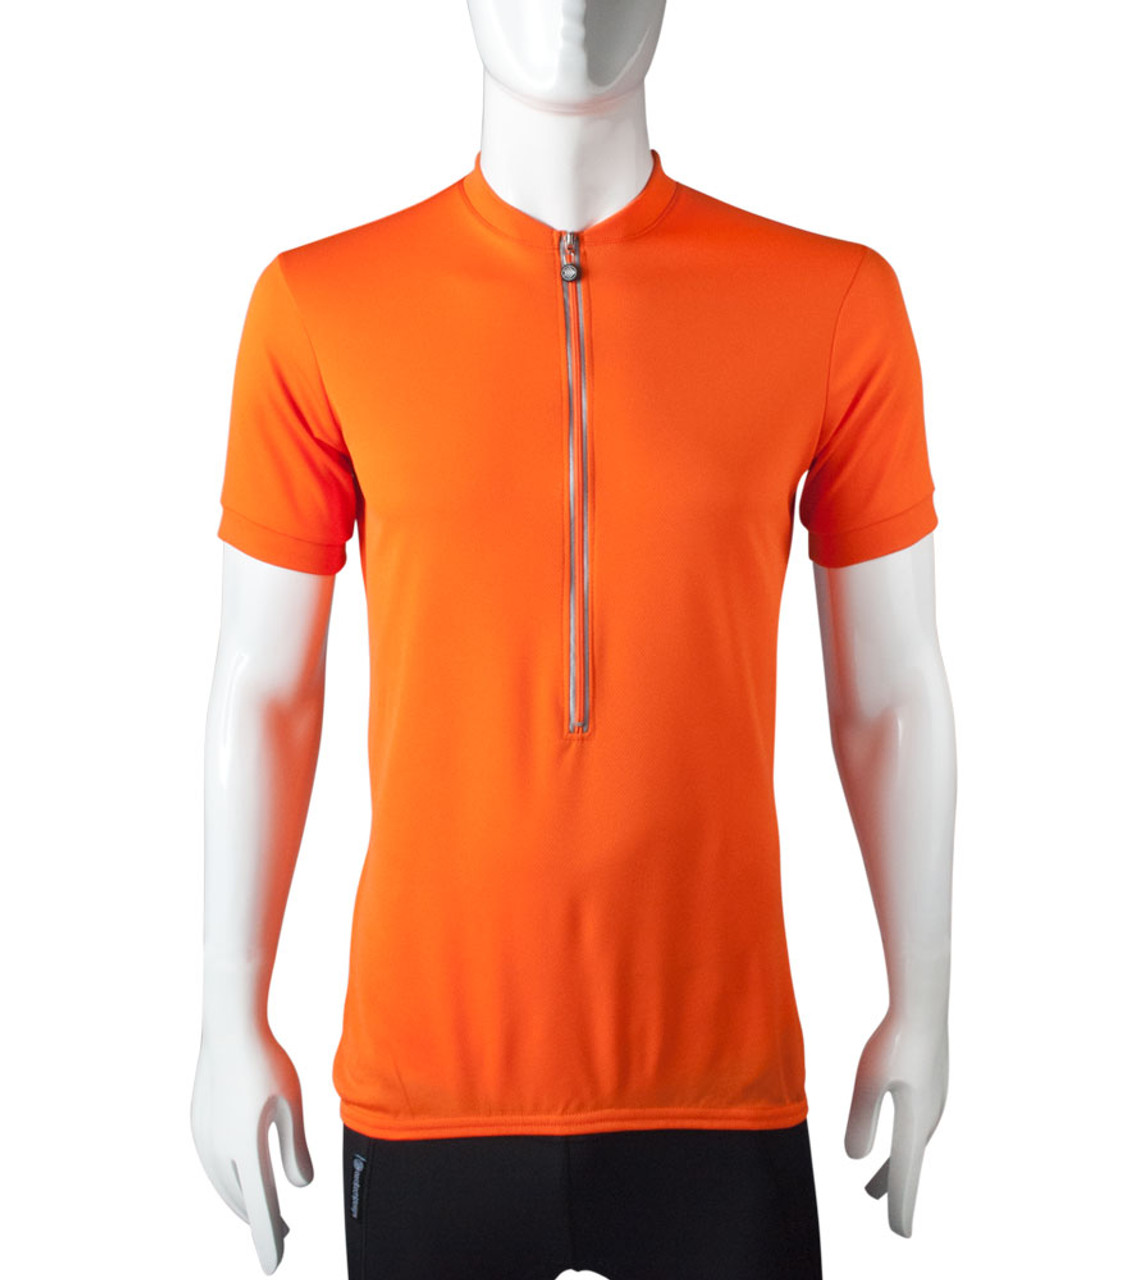 Tall Men's Bicycling Jersey with Extra Long Length Sleeves and Torso